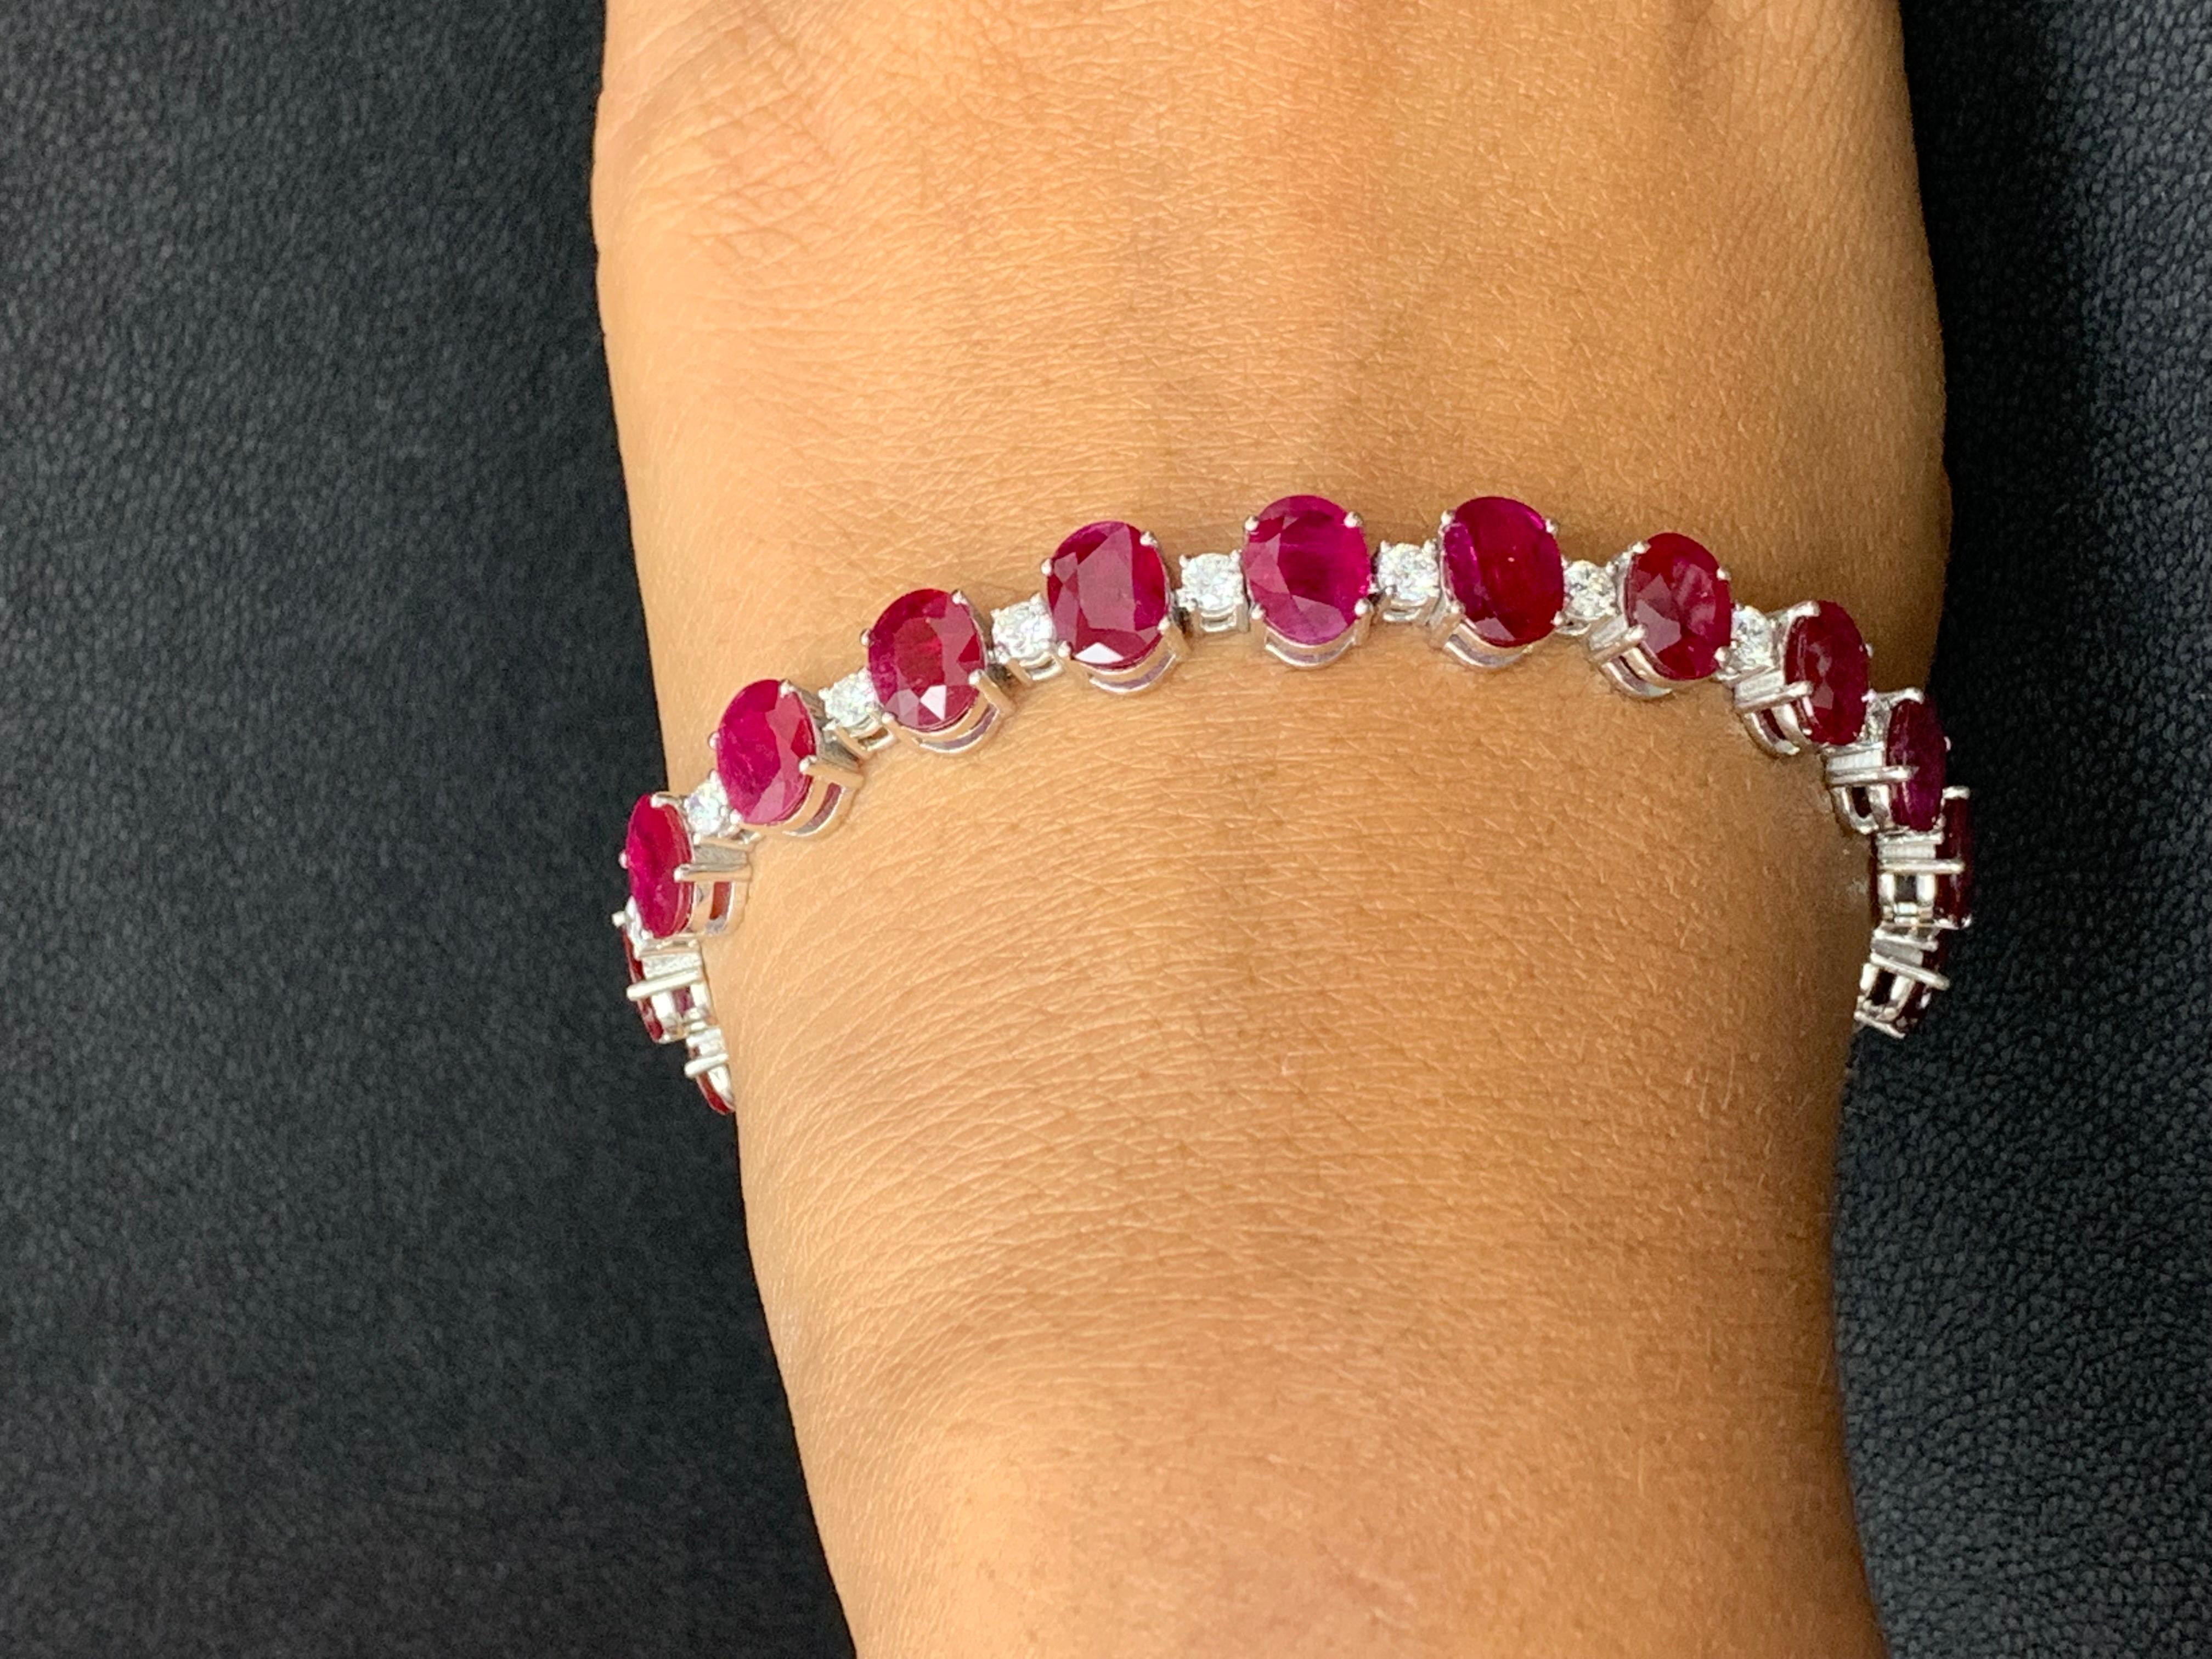 25.46 Carat Oval Cut Ruby and Diamond Tennis Bracelet in 14K White Gold For Sale 4